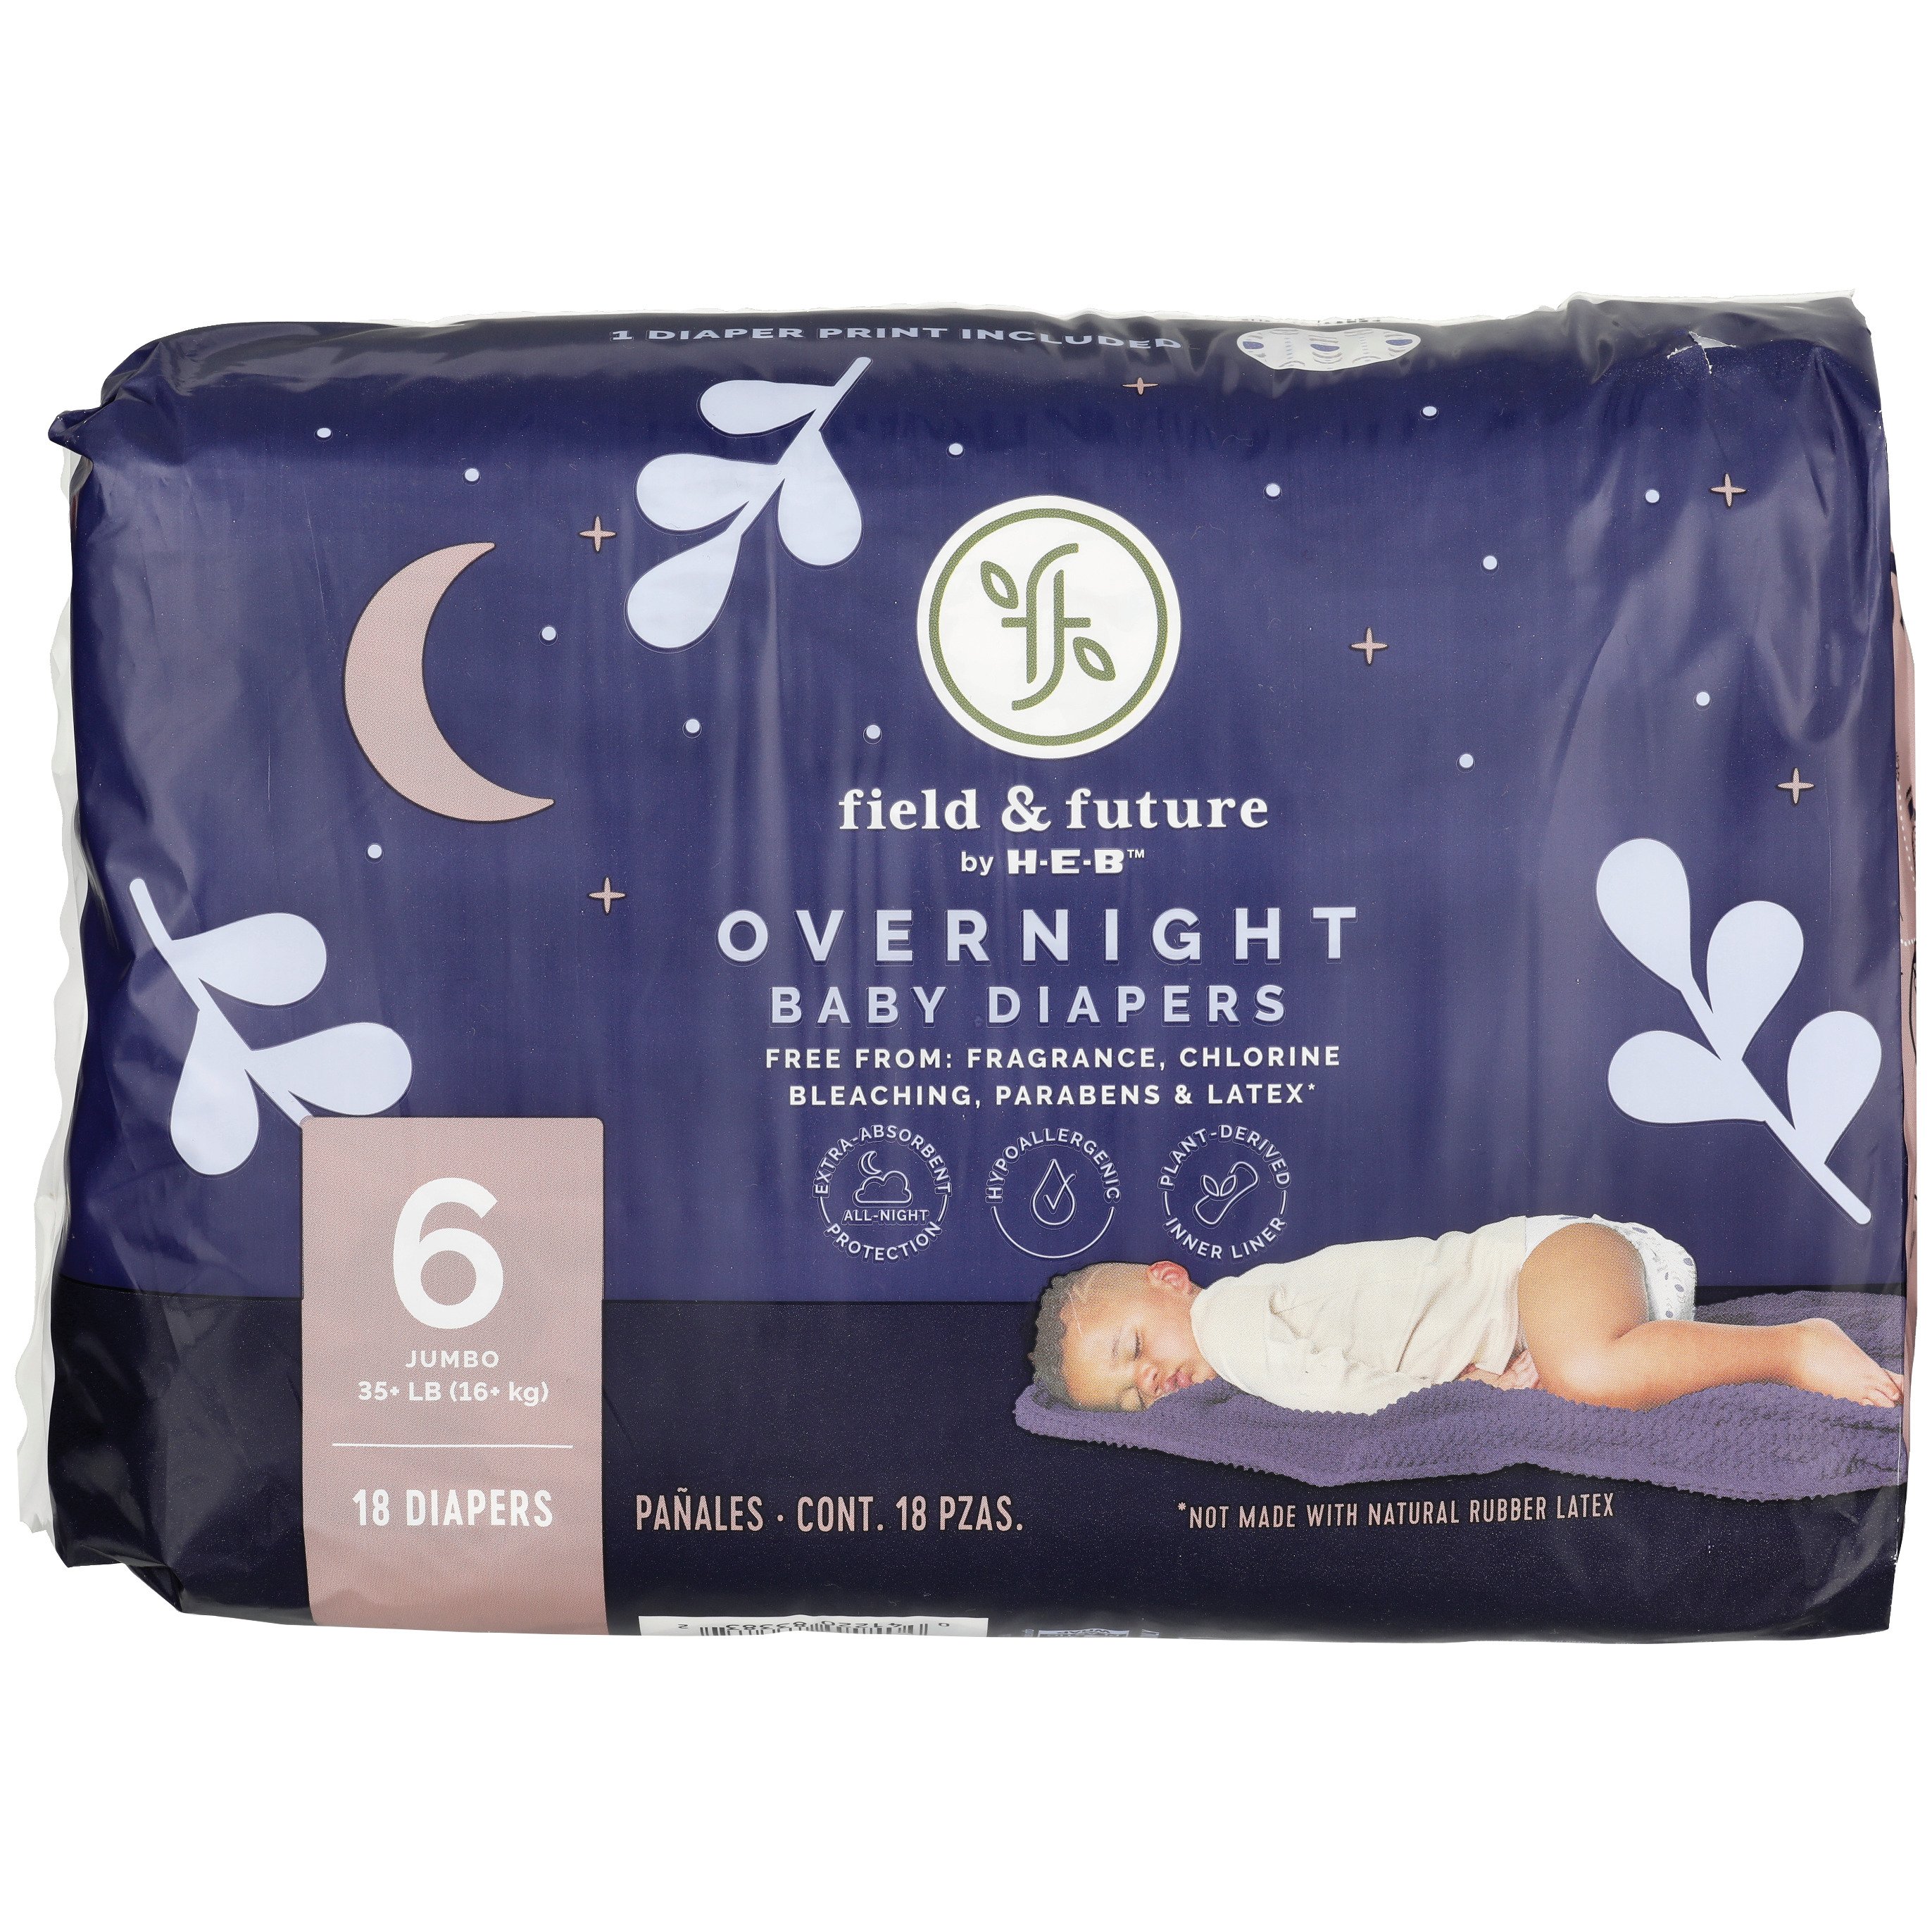 H-E-B Baby Overnight Diapers – Size 6